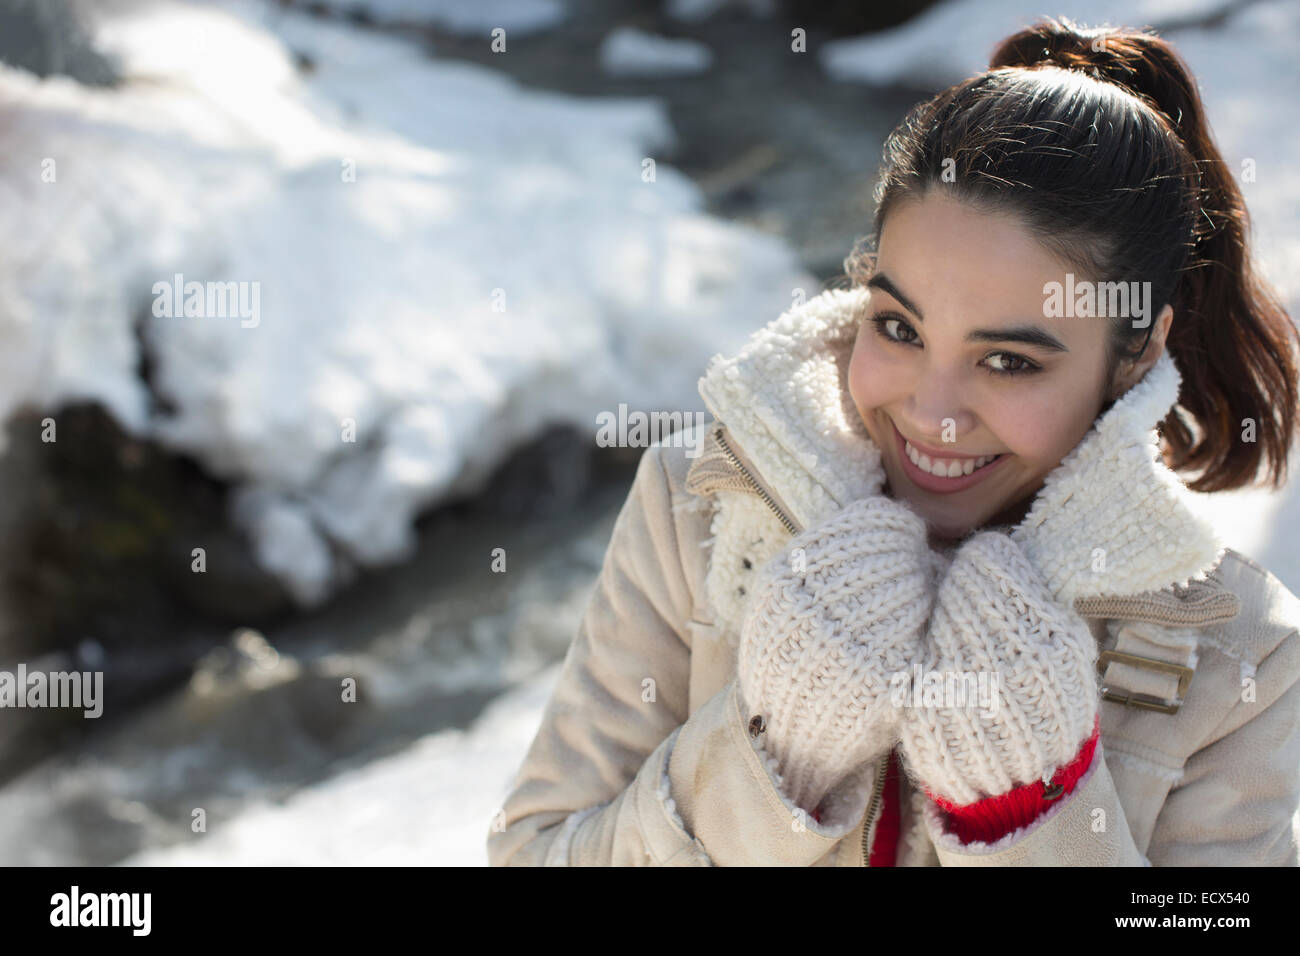 Portrait of smiling woman in snow Banque D'Images